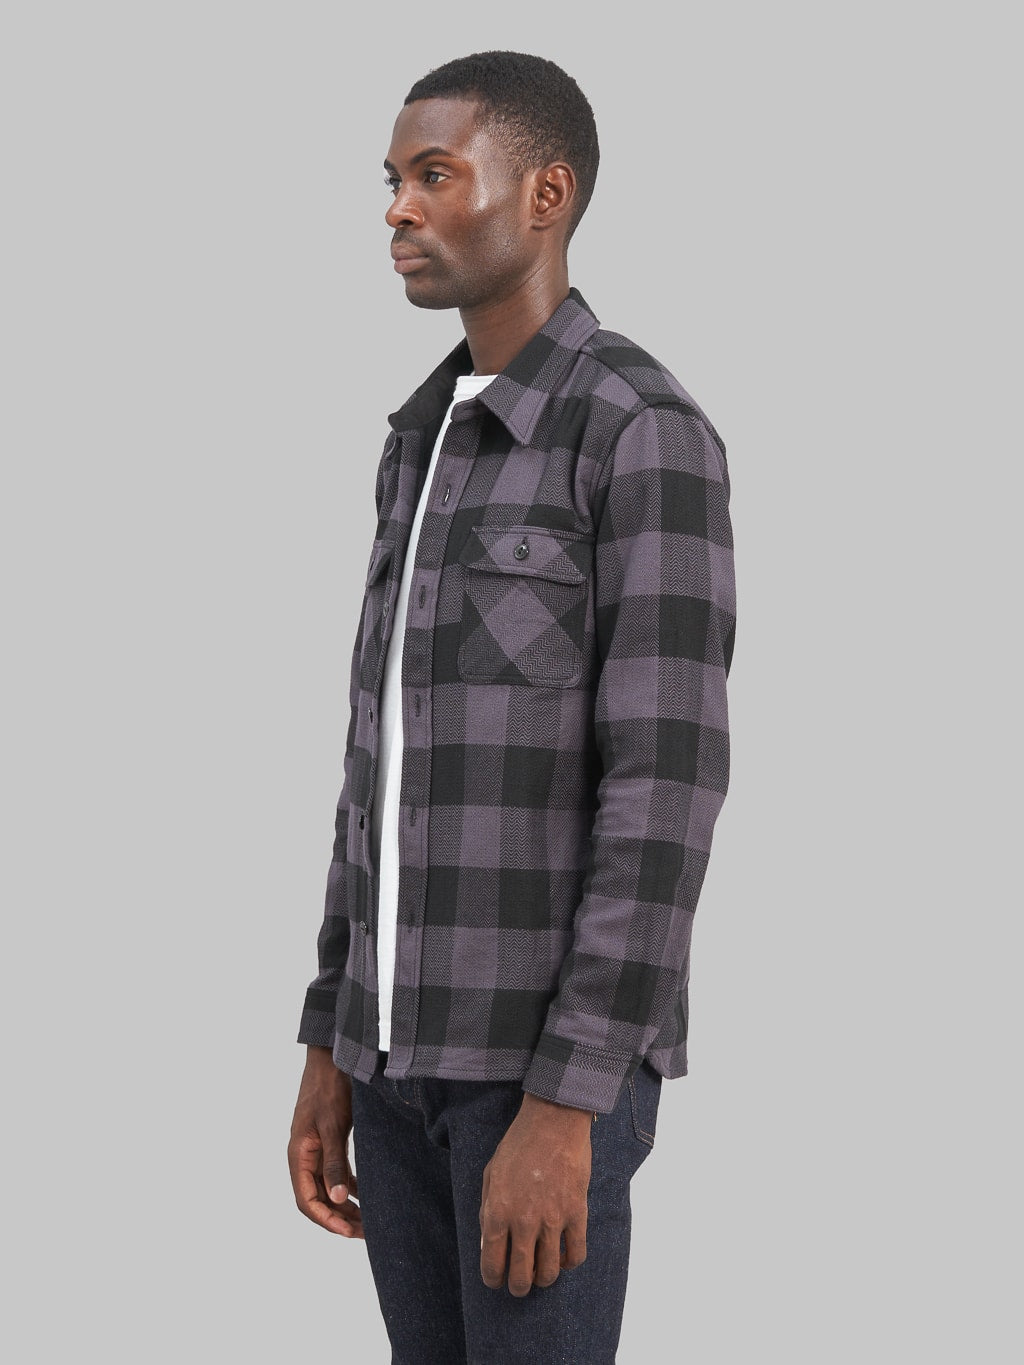 The Flat Head Block Check Flannel Shirt Grey model side fit